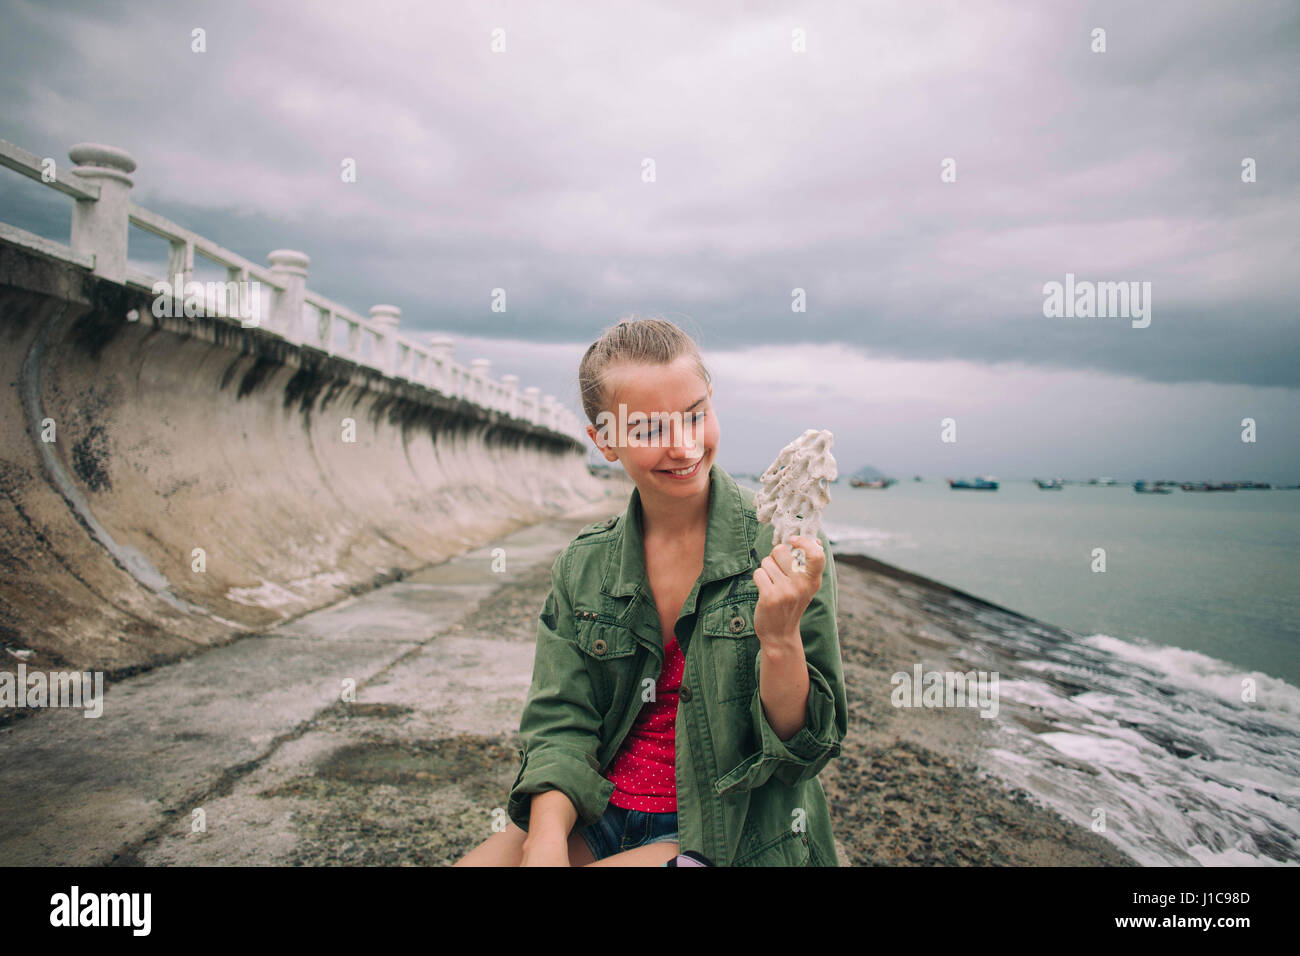 Caucasian woman holding shell at beach Banque D'Images